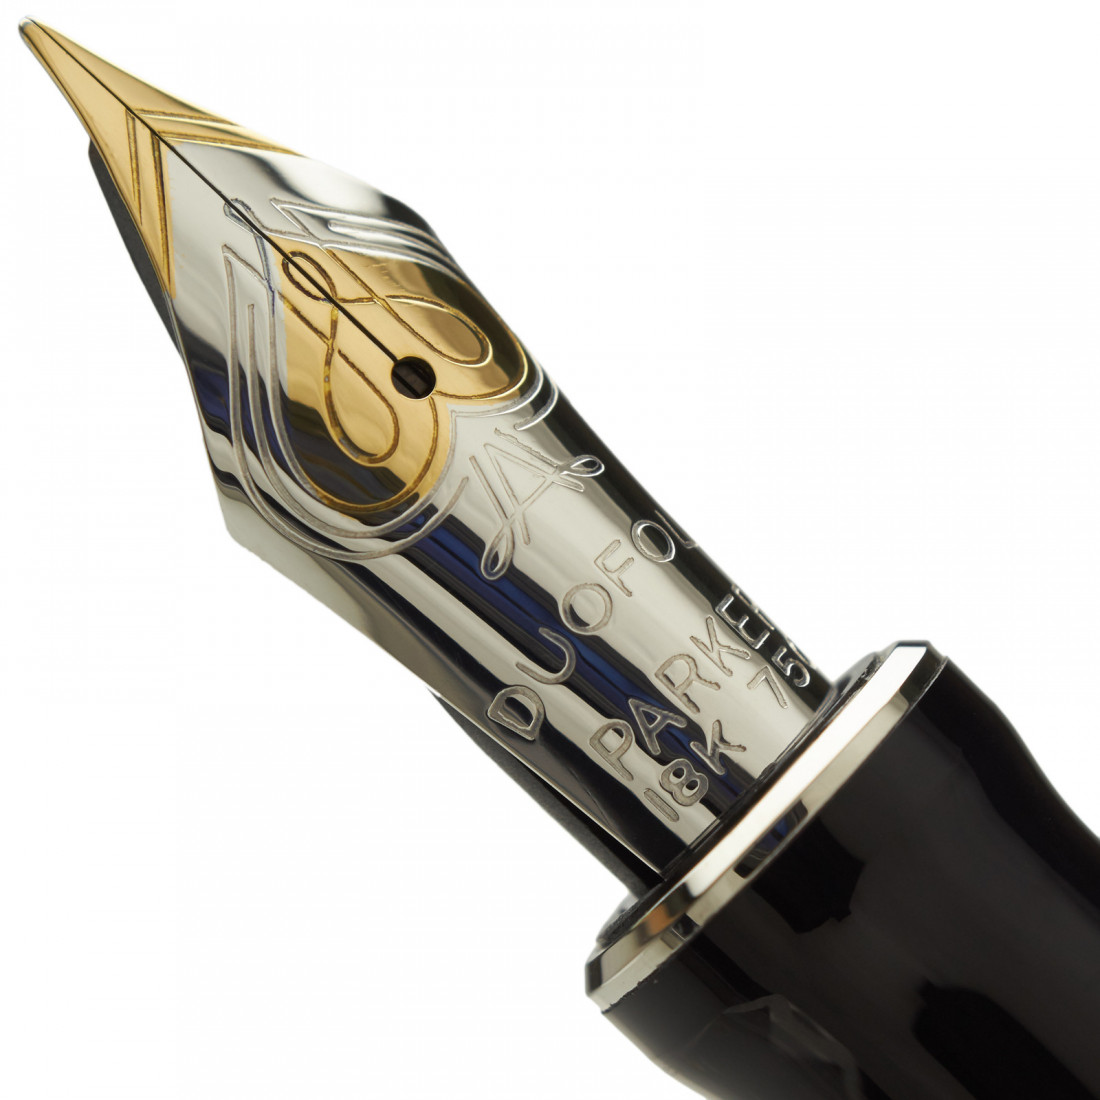 Parker Duofold Centennial Fountain Pen, Classic Big Red Vintage, Solid Gold Nib, Black Ink and Convertor (1931376)